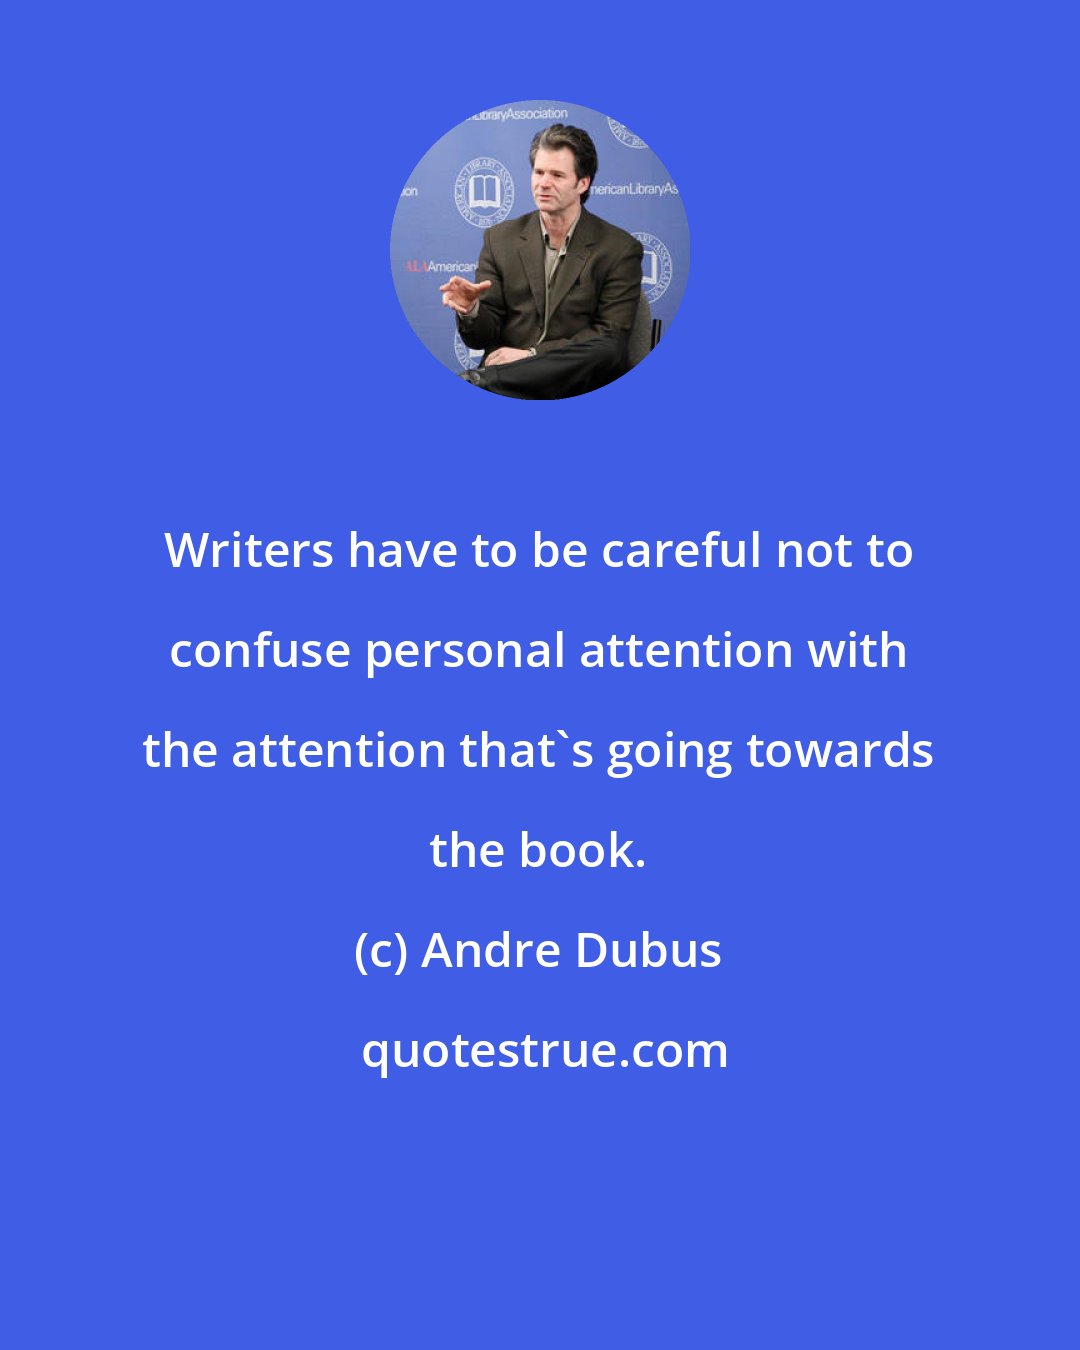 Andre Dubus: Writers have to be careful not to confuse personal attention with the attention that's going towards the book.